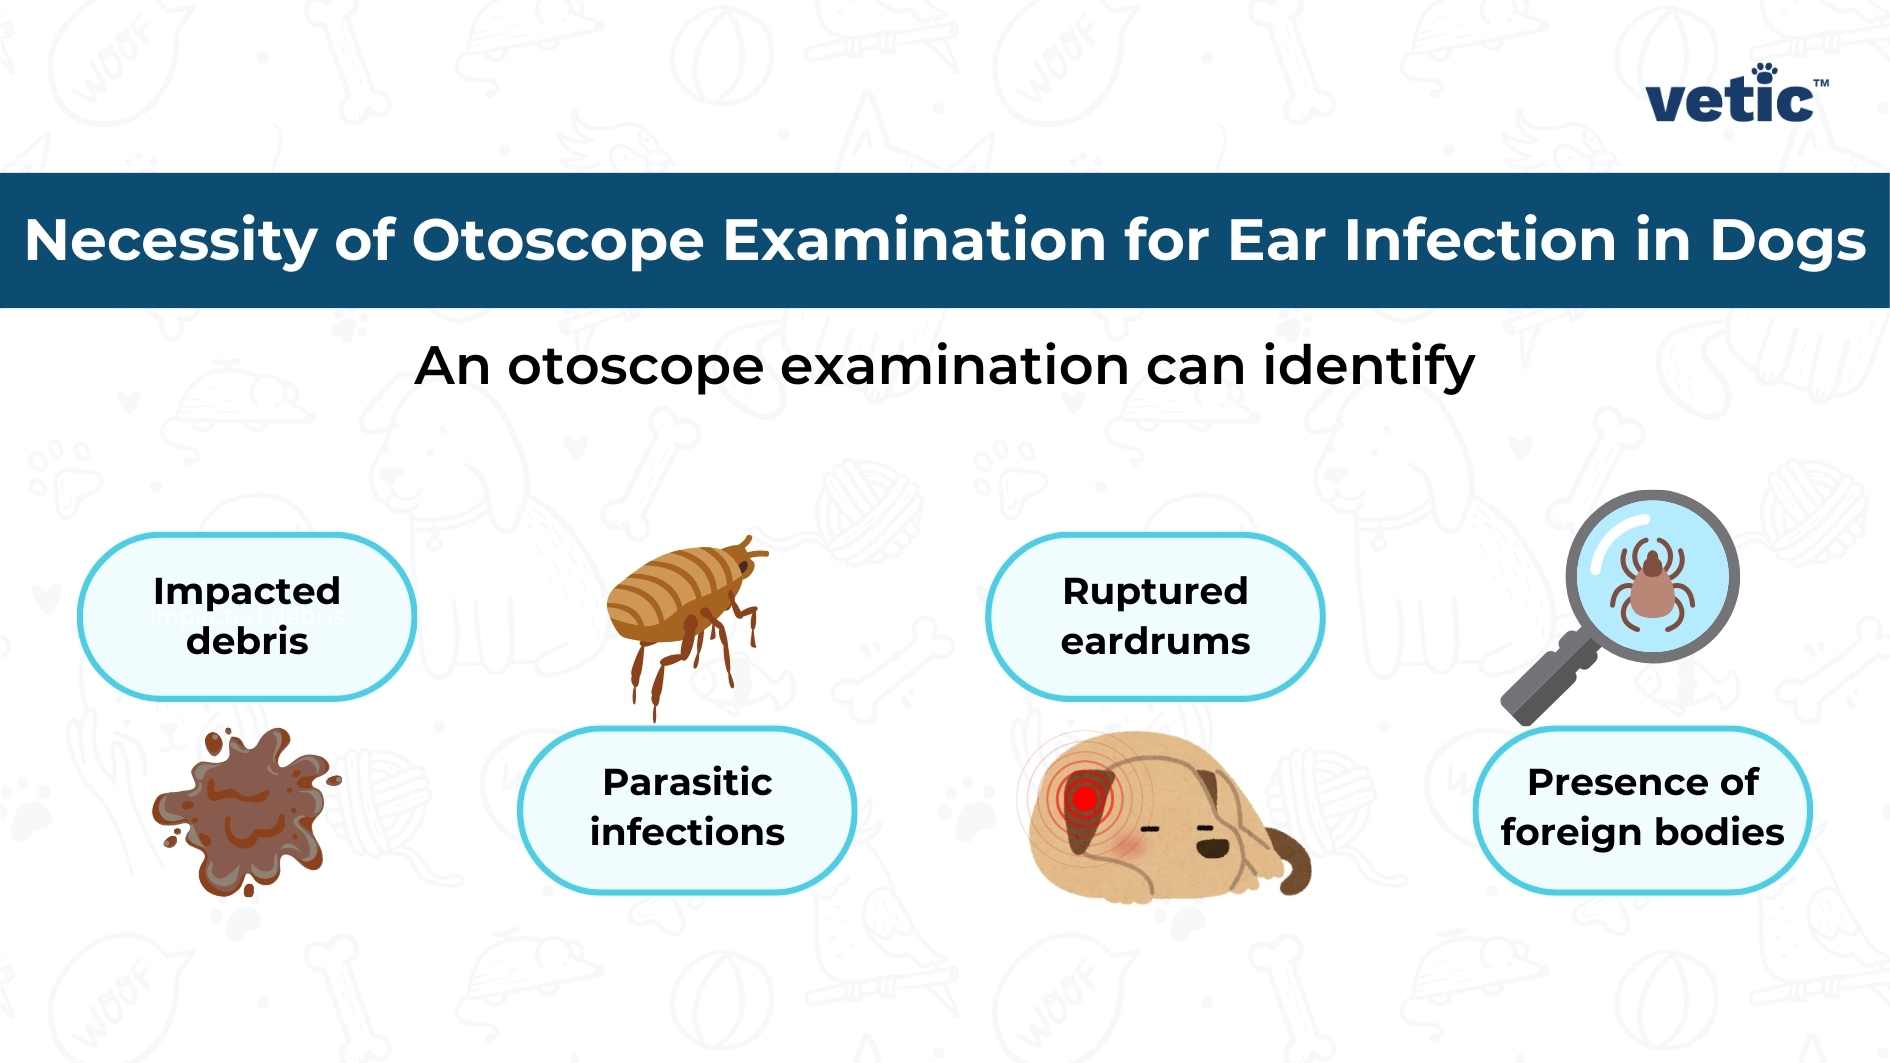 An informative image from vetiC detailing the necessity of otoscope examination for identifying ear infections in dogs, showcasing various conditions like impacted debris, parasitic infections, ruptured eardrums, and presence of foreign bodies.